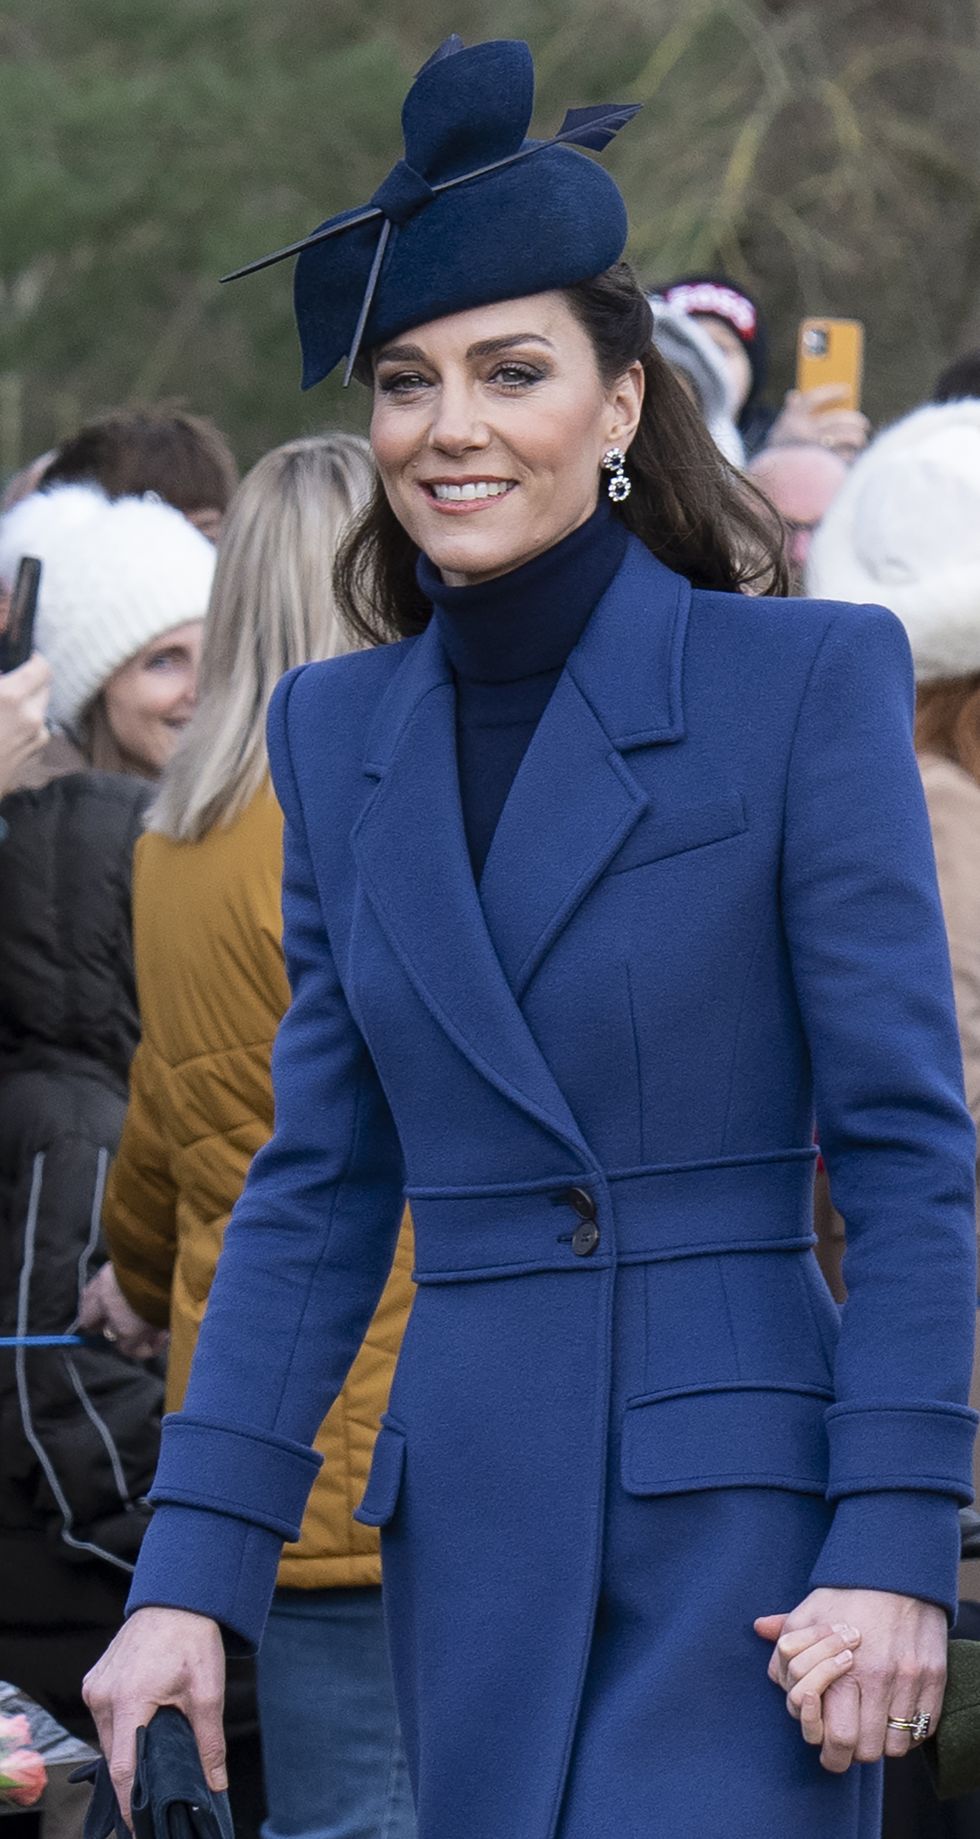 sandringham, norfolk december 25 catherine, princess of wales attends the christmas day service at st mary magdalene church on december 25, 2023 in sandringham, norfolk photo by mark cuthbertuk press via getty images